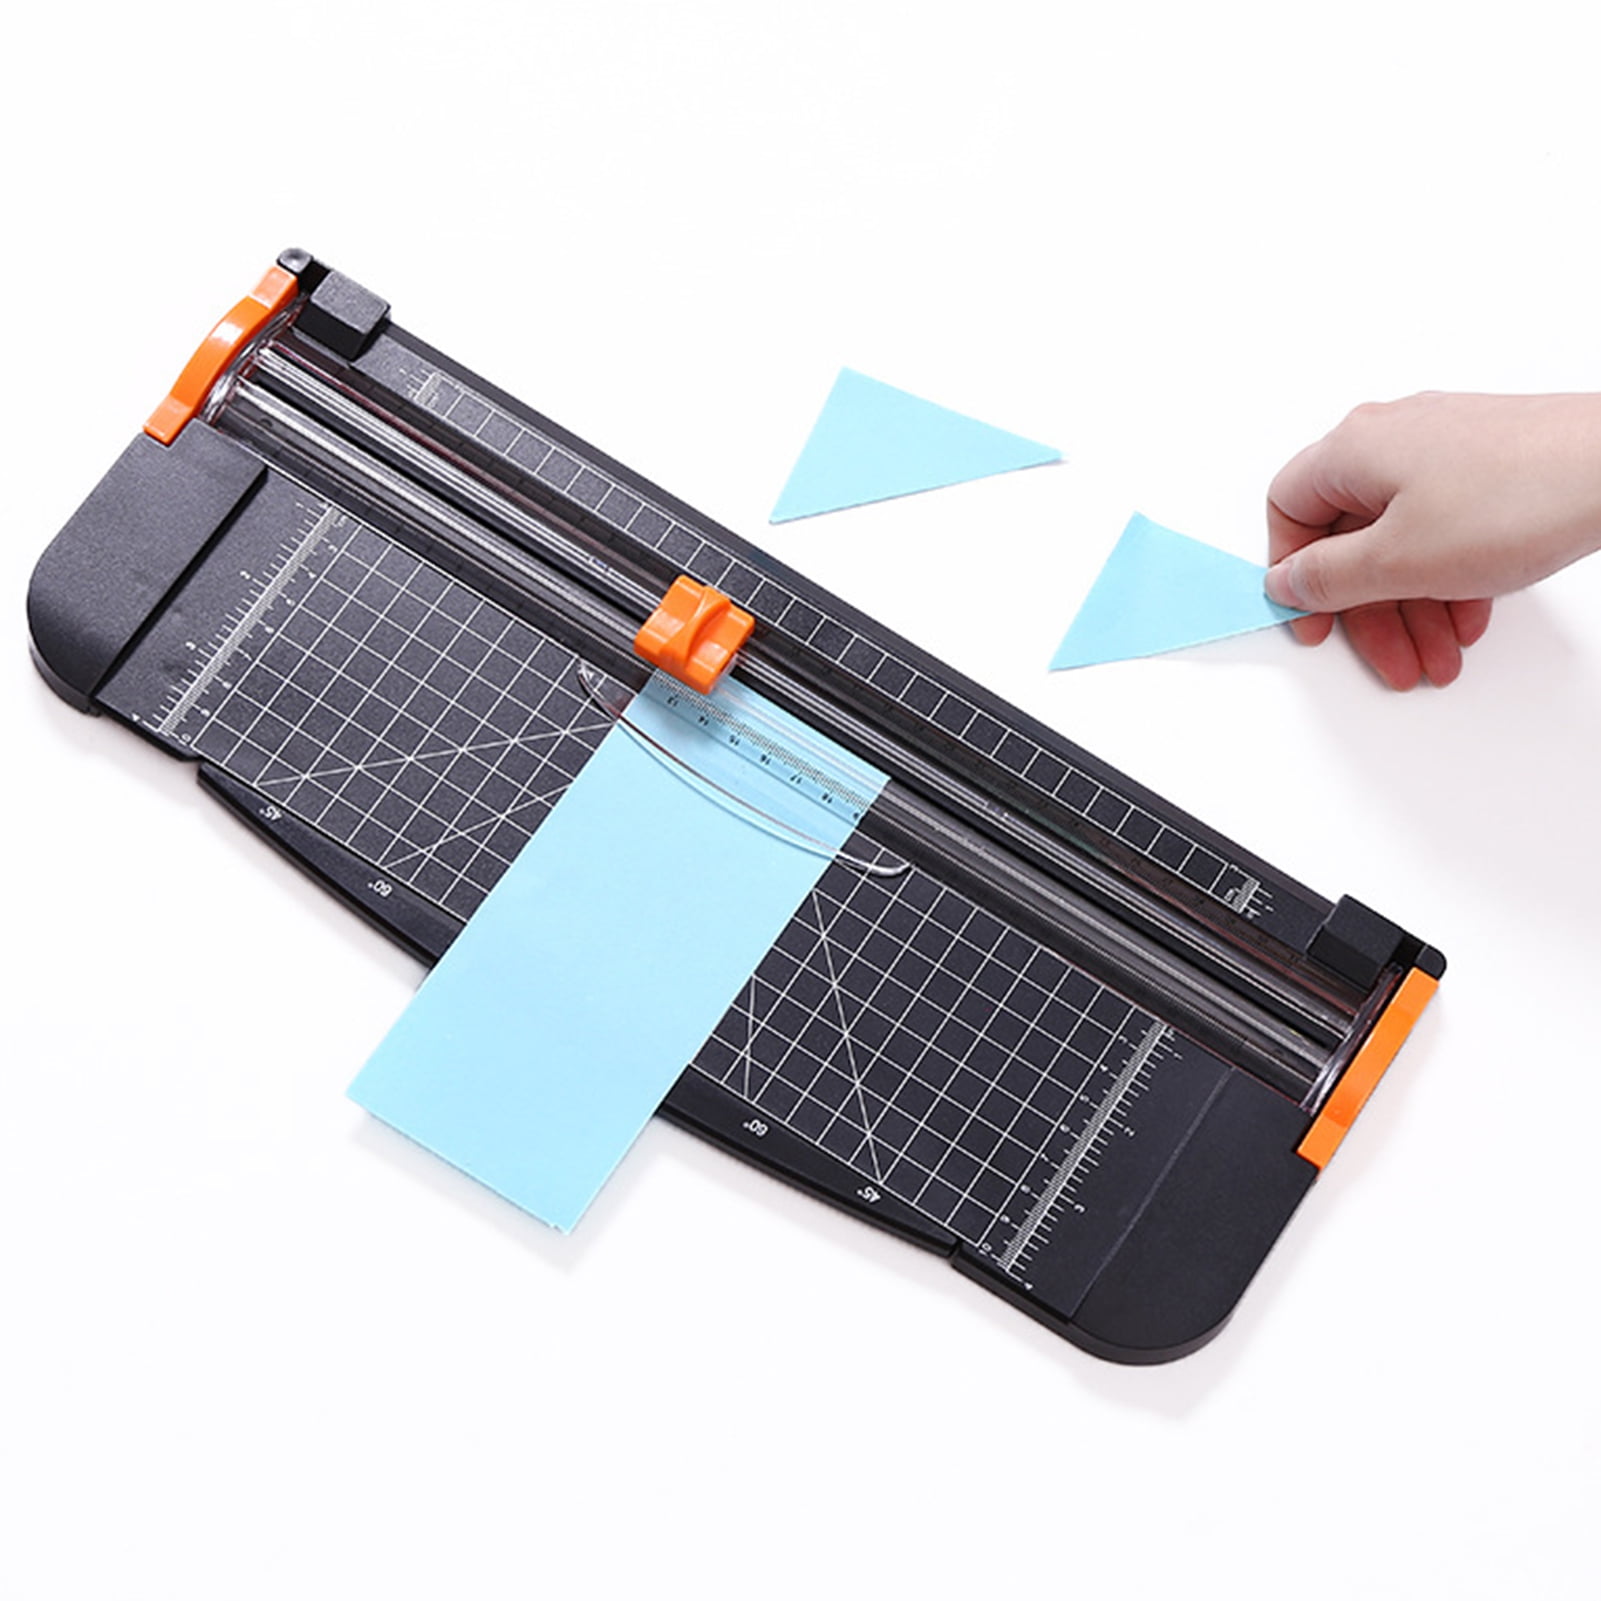 A4 Paper Cutter Folding Free Paper Trimmer Scrapbooking Tool For